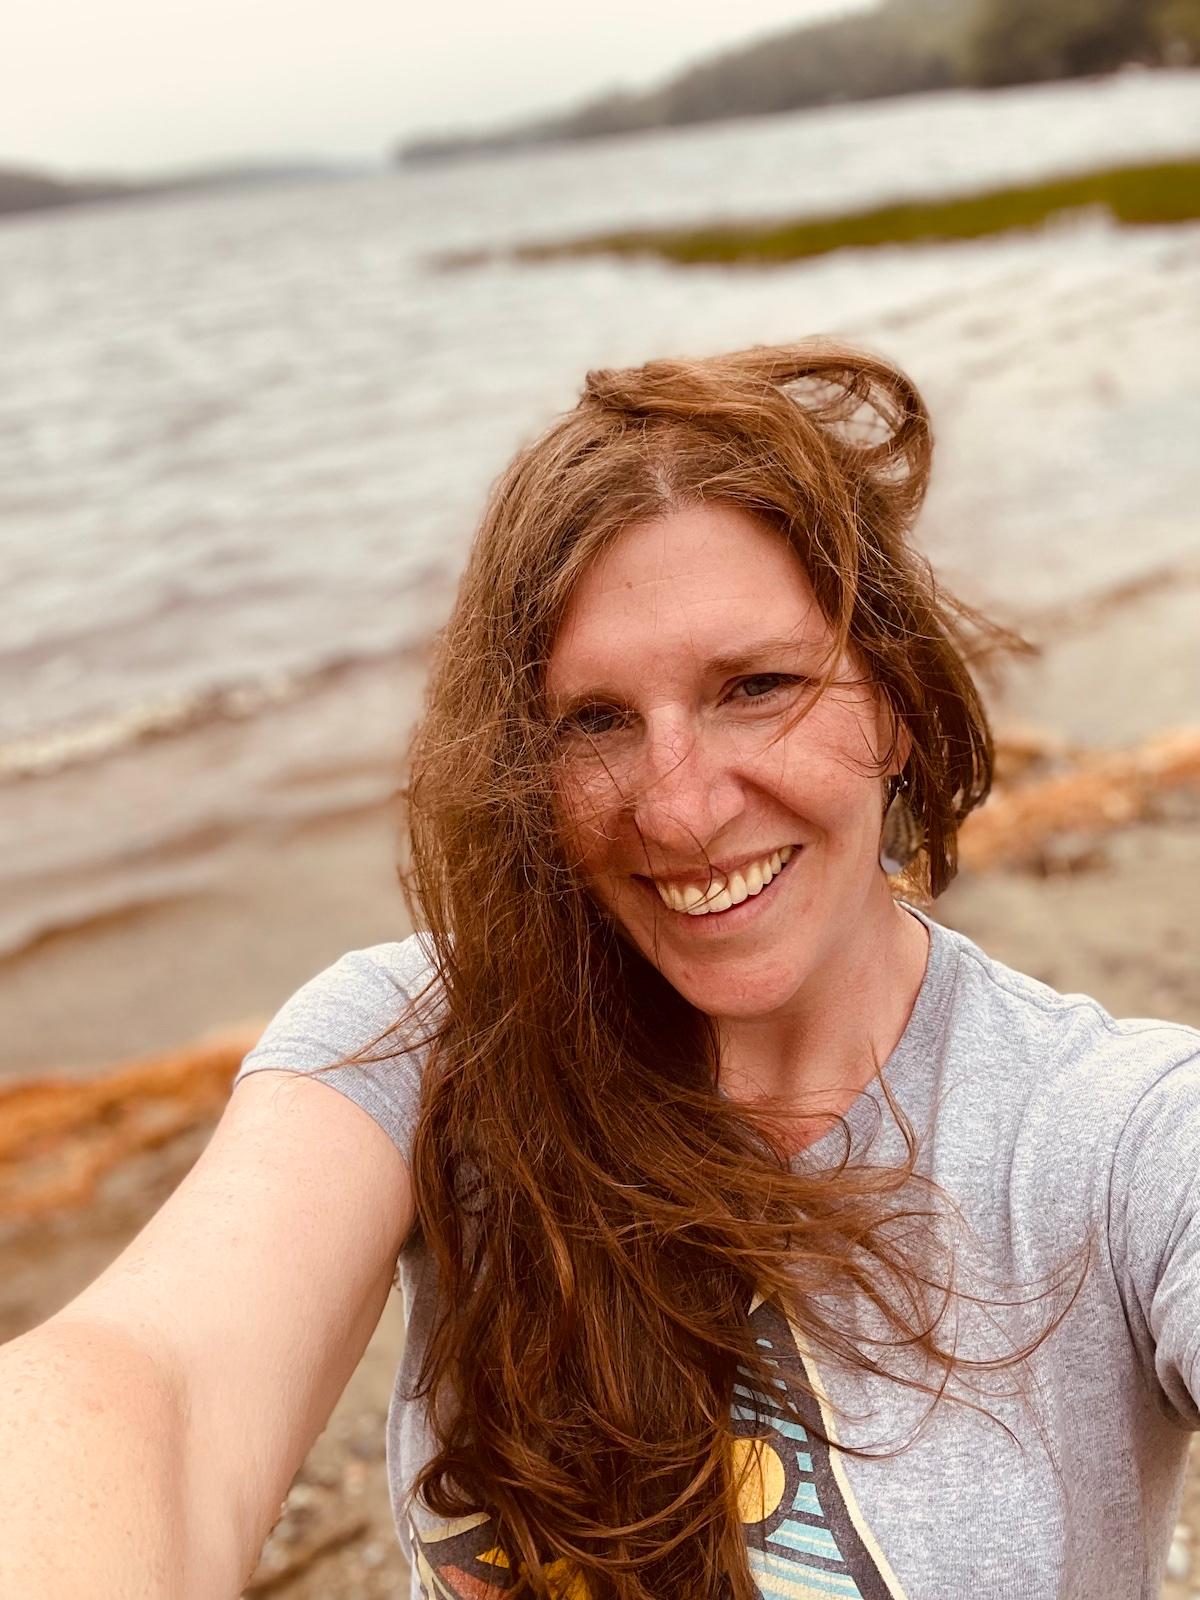 Maine parent Amber Lavigne learned that school officials started to gender transition her daughter without her knowledge. Photo taken at Biscay Pond, Maine on June 27, 2022. (Courtesy of Amber Lavigne)